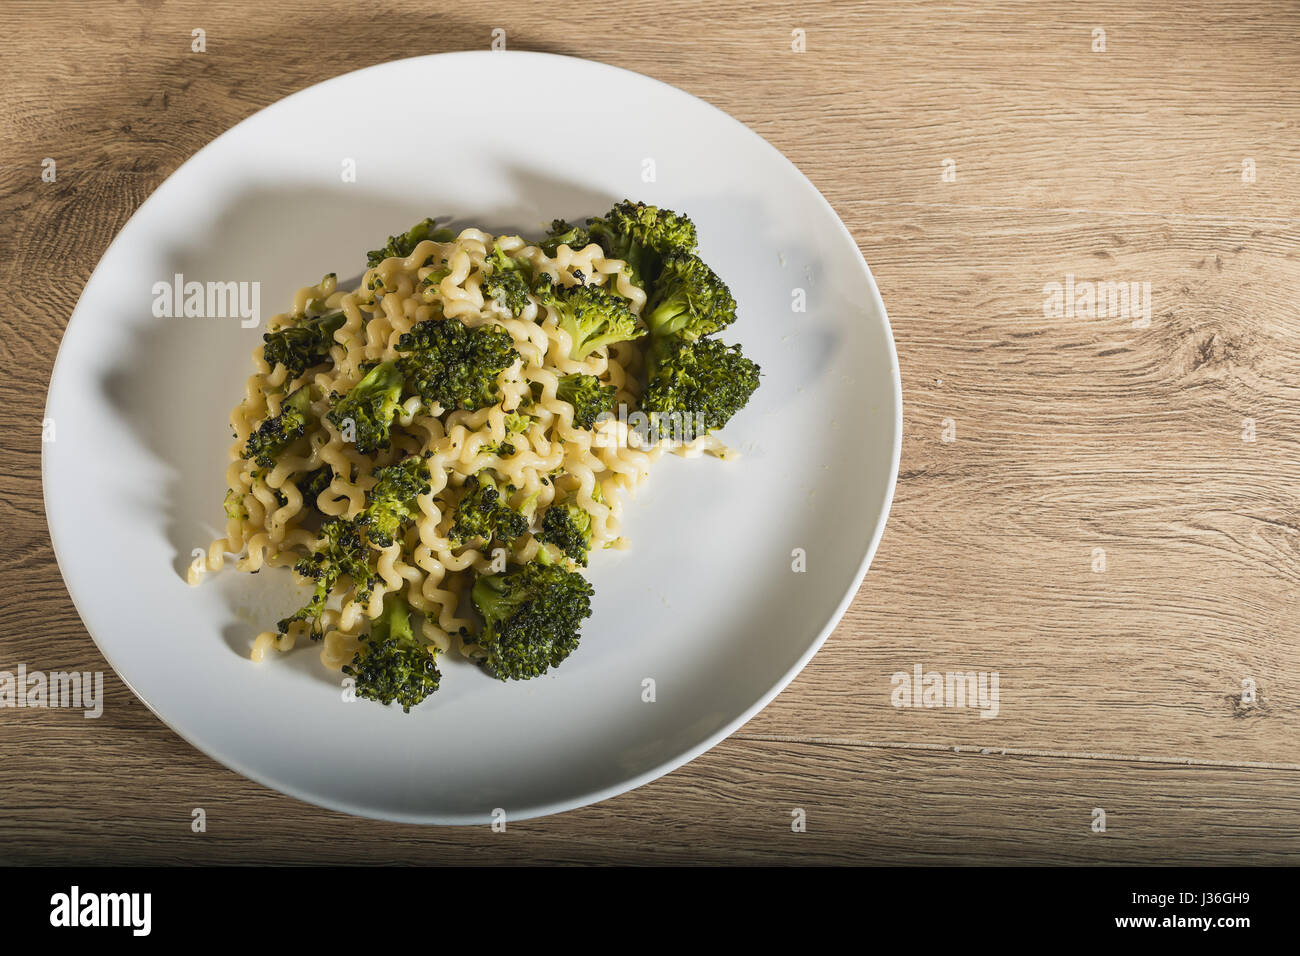 Long dish with broccoli from above Stock Photo